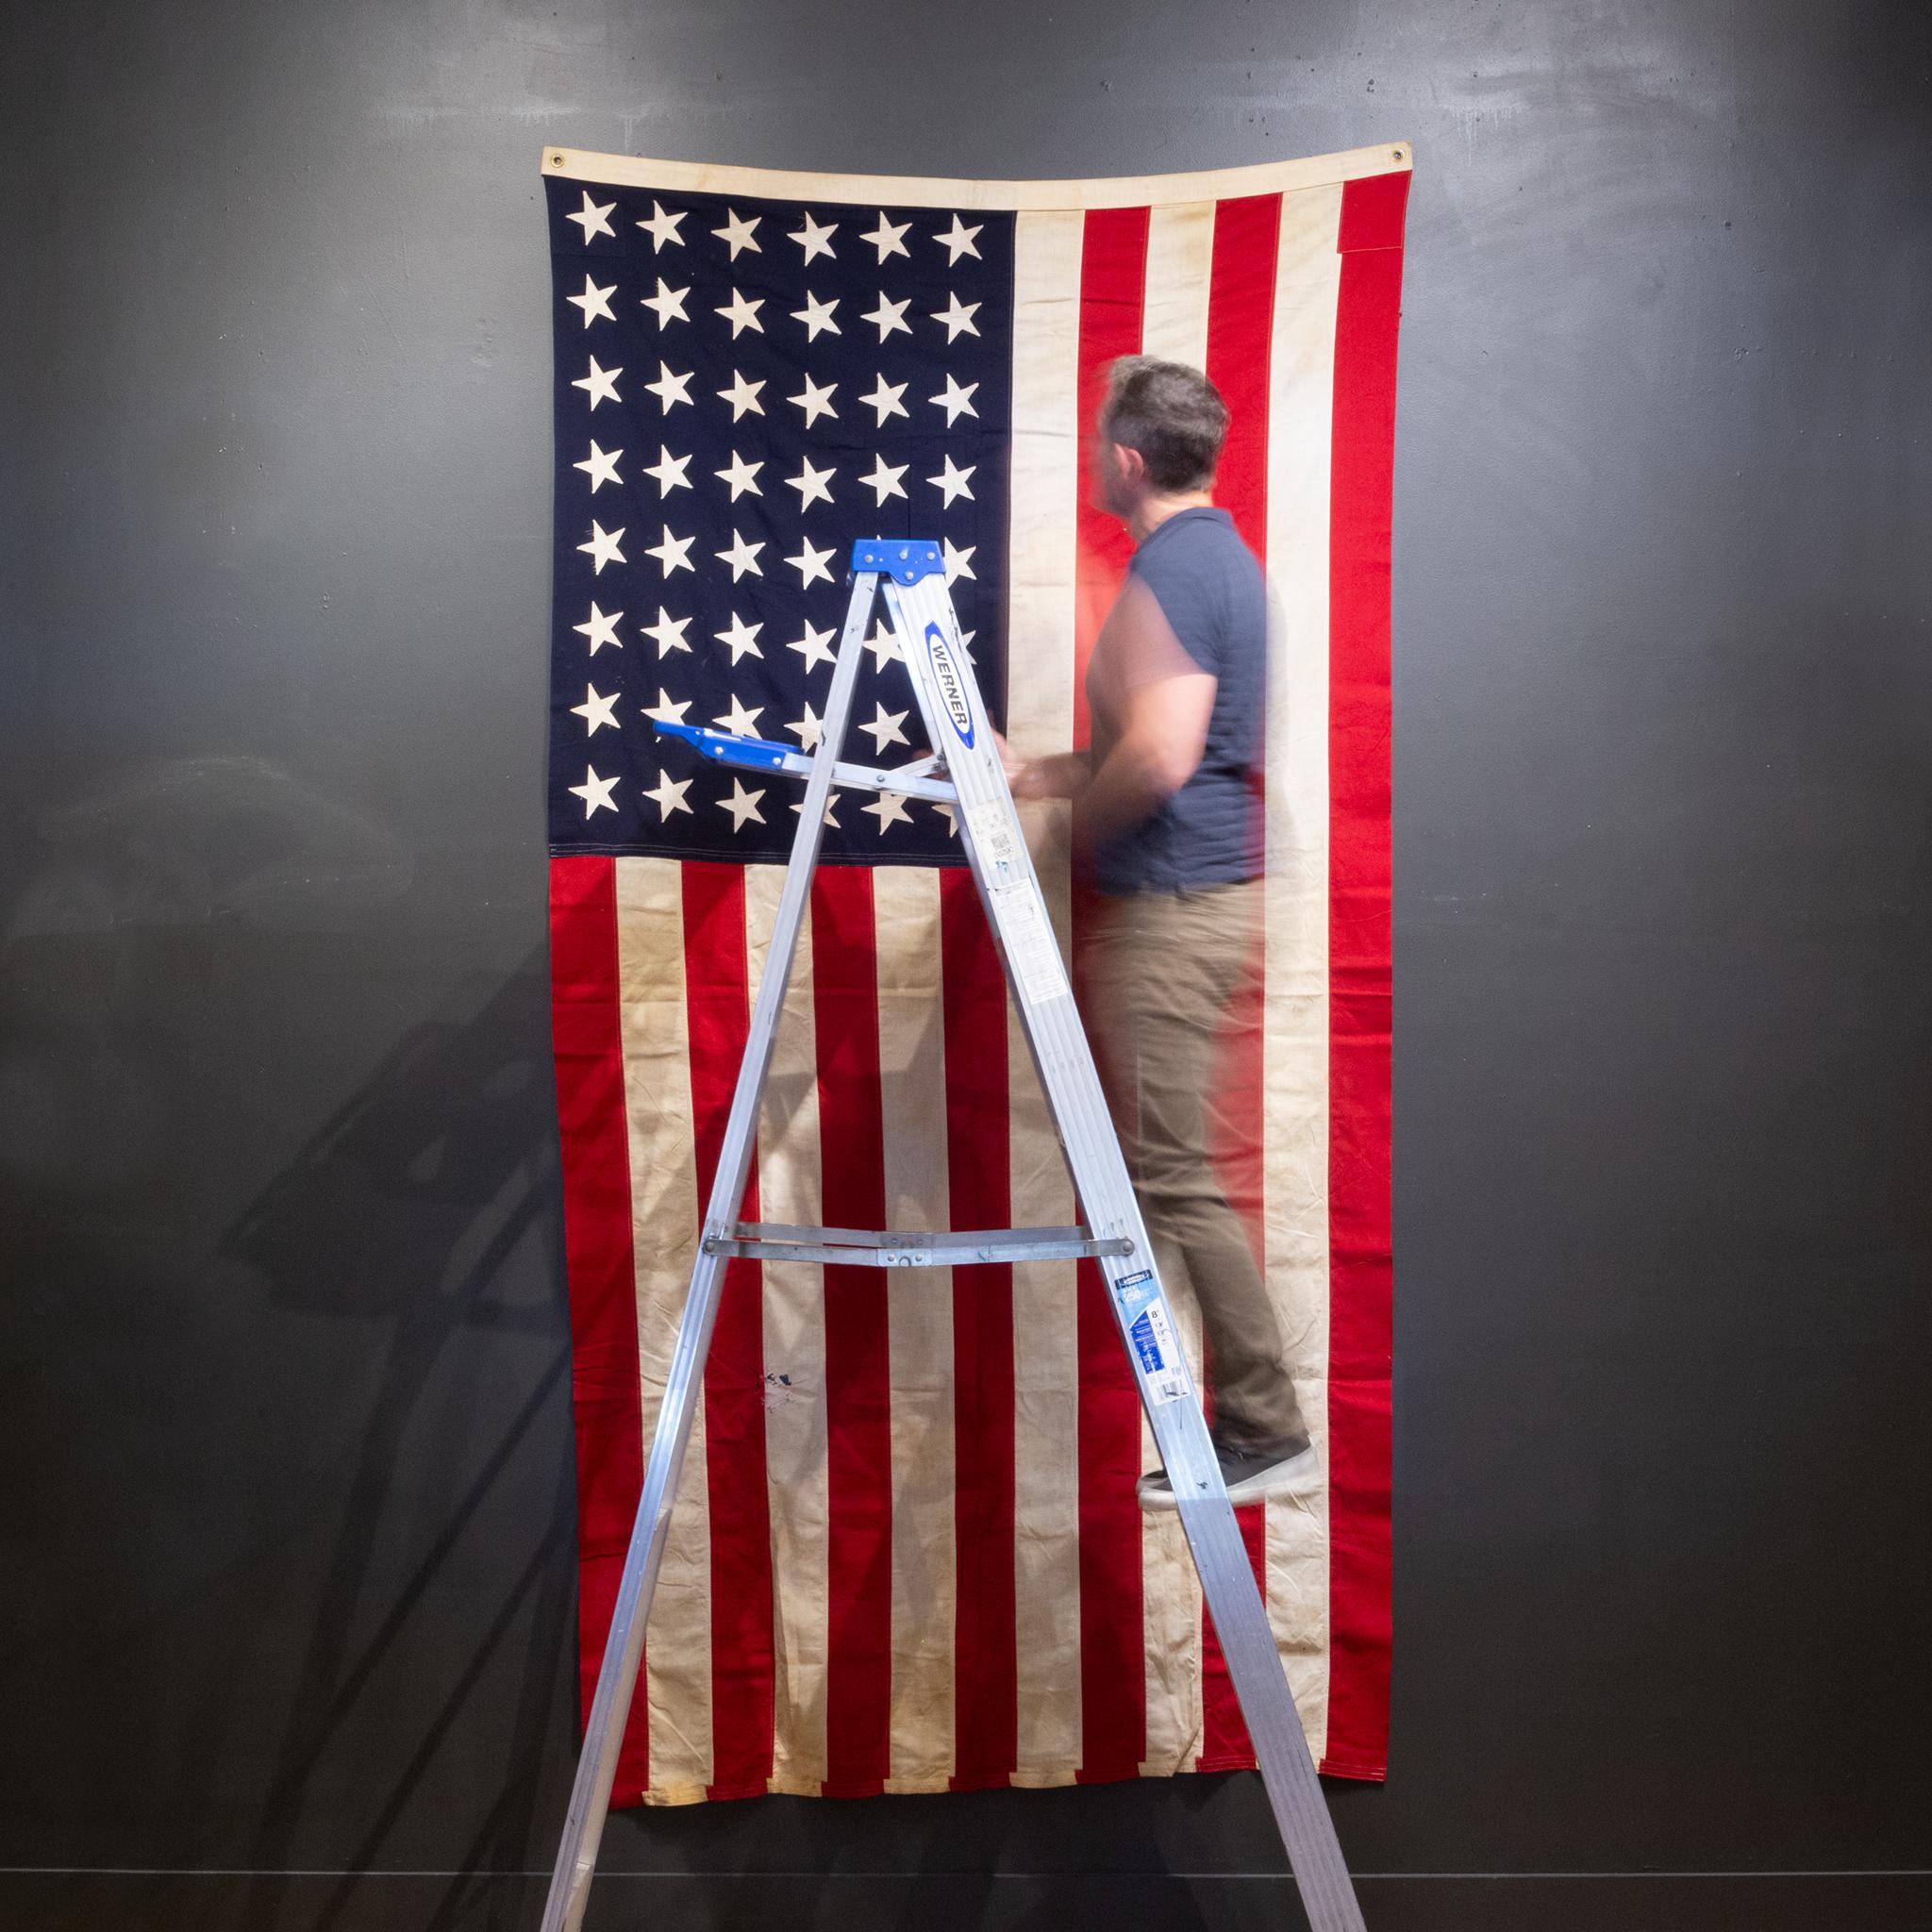 About

This is an original fabric large American flag with 48 hand sewn stars and metal grommets to hang it. The flag has retained its original color with some structural damage and slight fading.

Creator unknown.
Date of manufacture